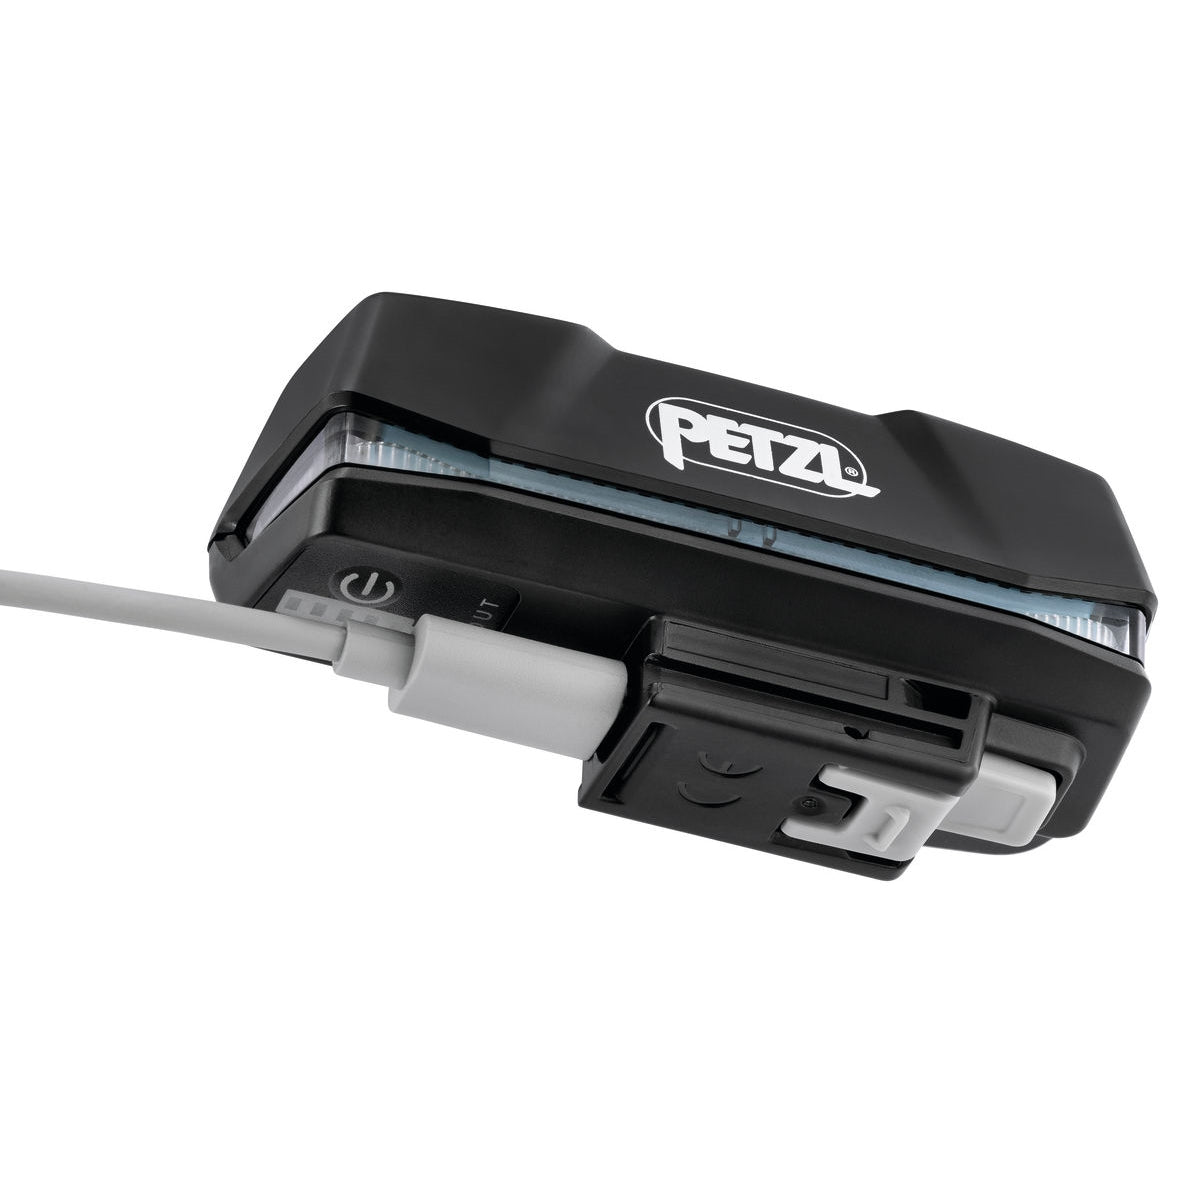 Rechargeable battery for PIXA® 3R, Rechargeable Lithium-Ion